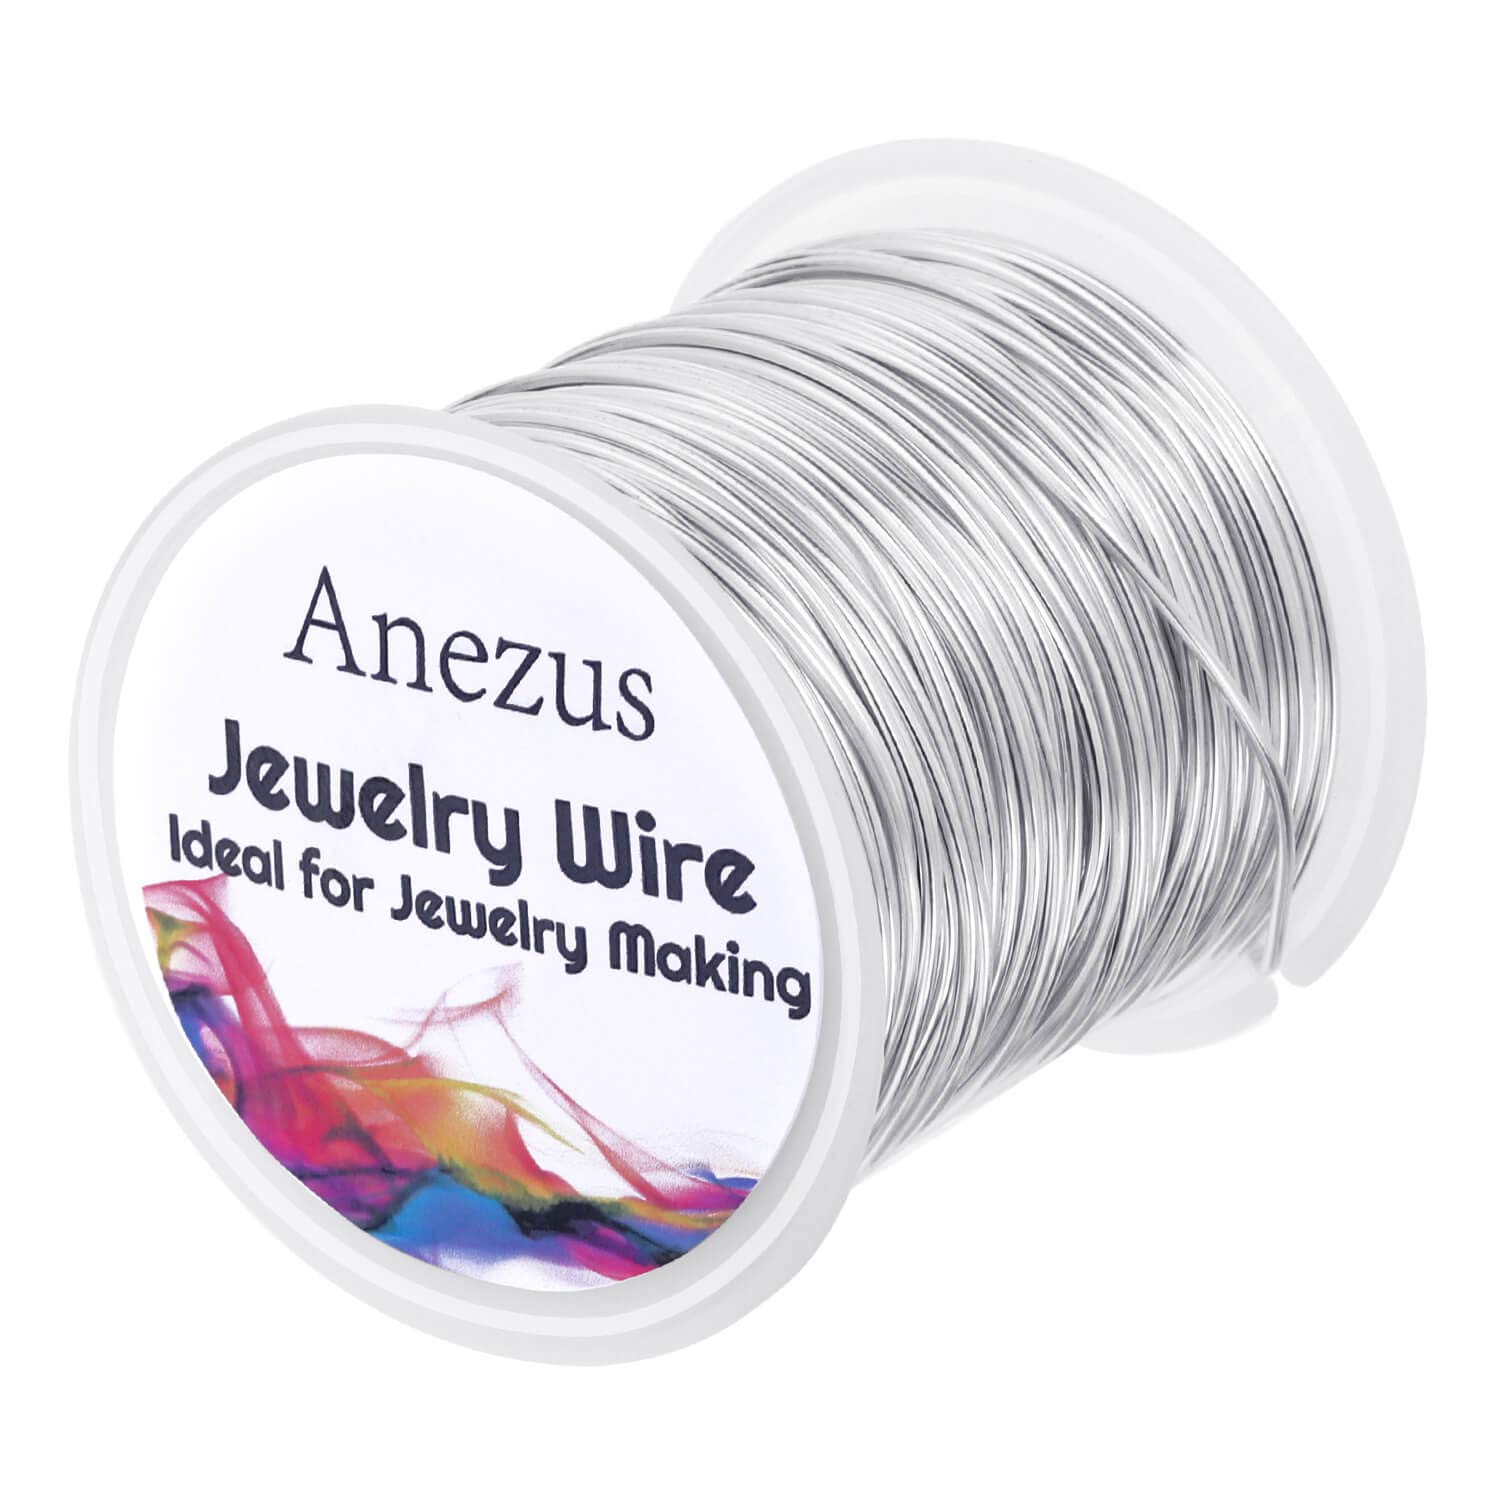 Buy Anezus 18 Gauge Jewelry Wire for Jewelry Making, anezus Craft